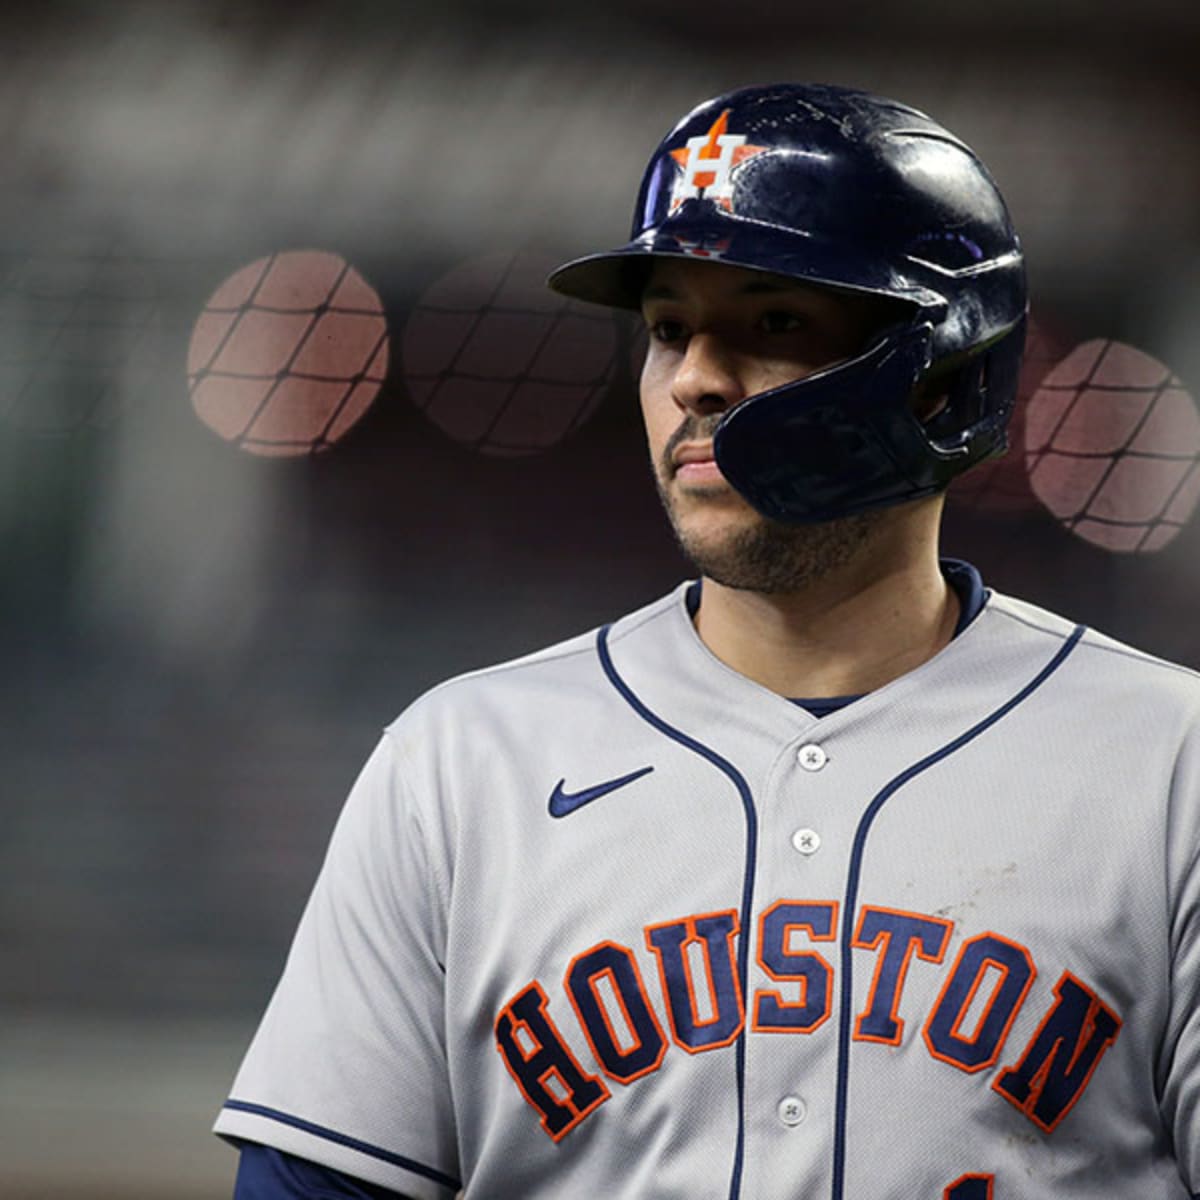 STUNNER: Carlos Correa Agrees to Terms with Minnesota Twins